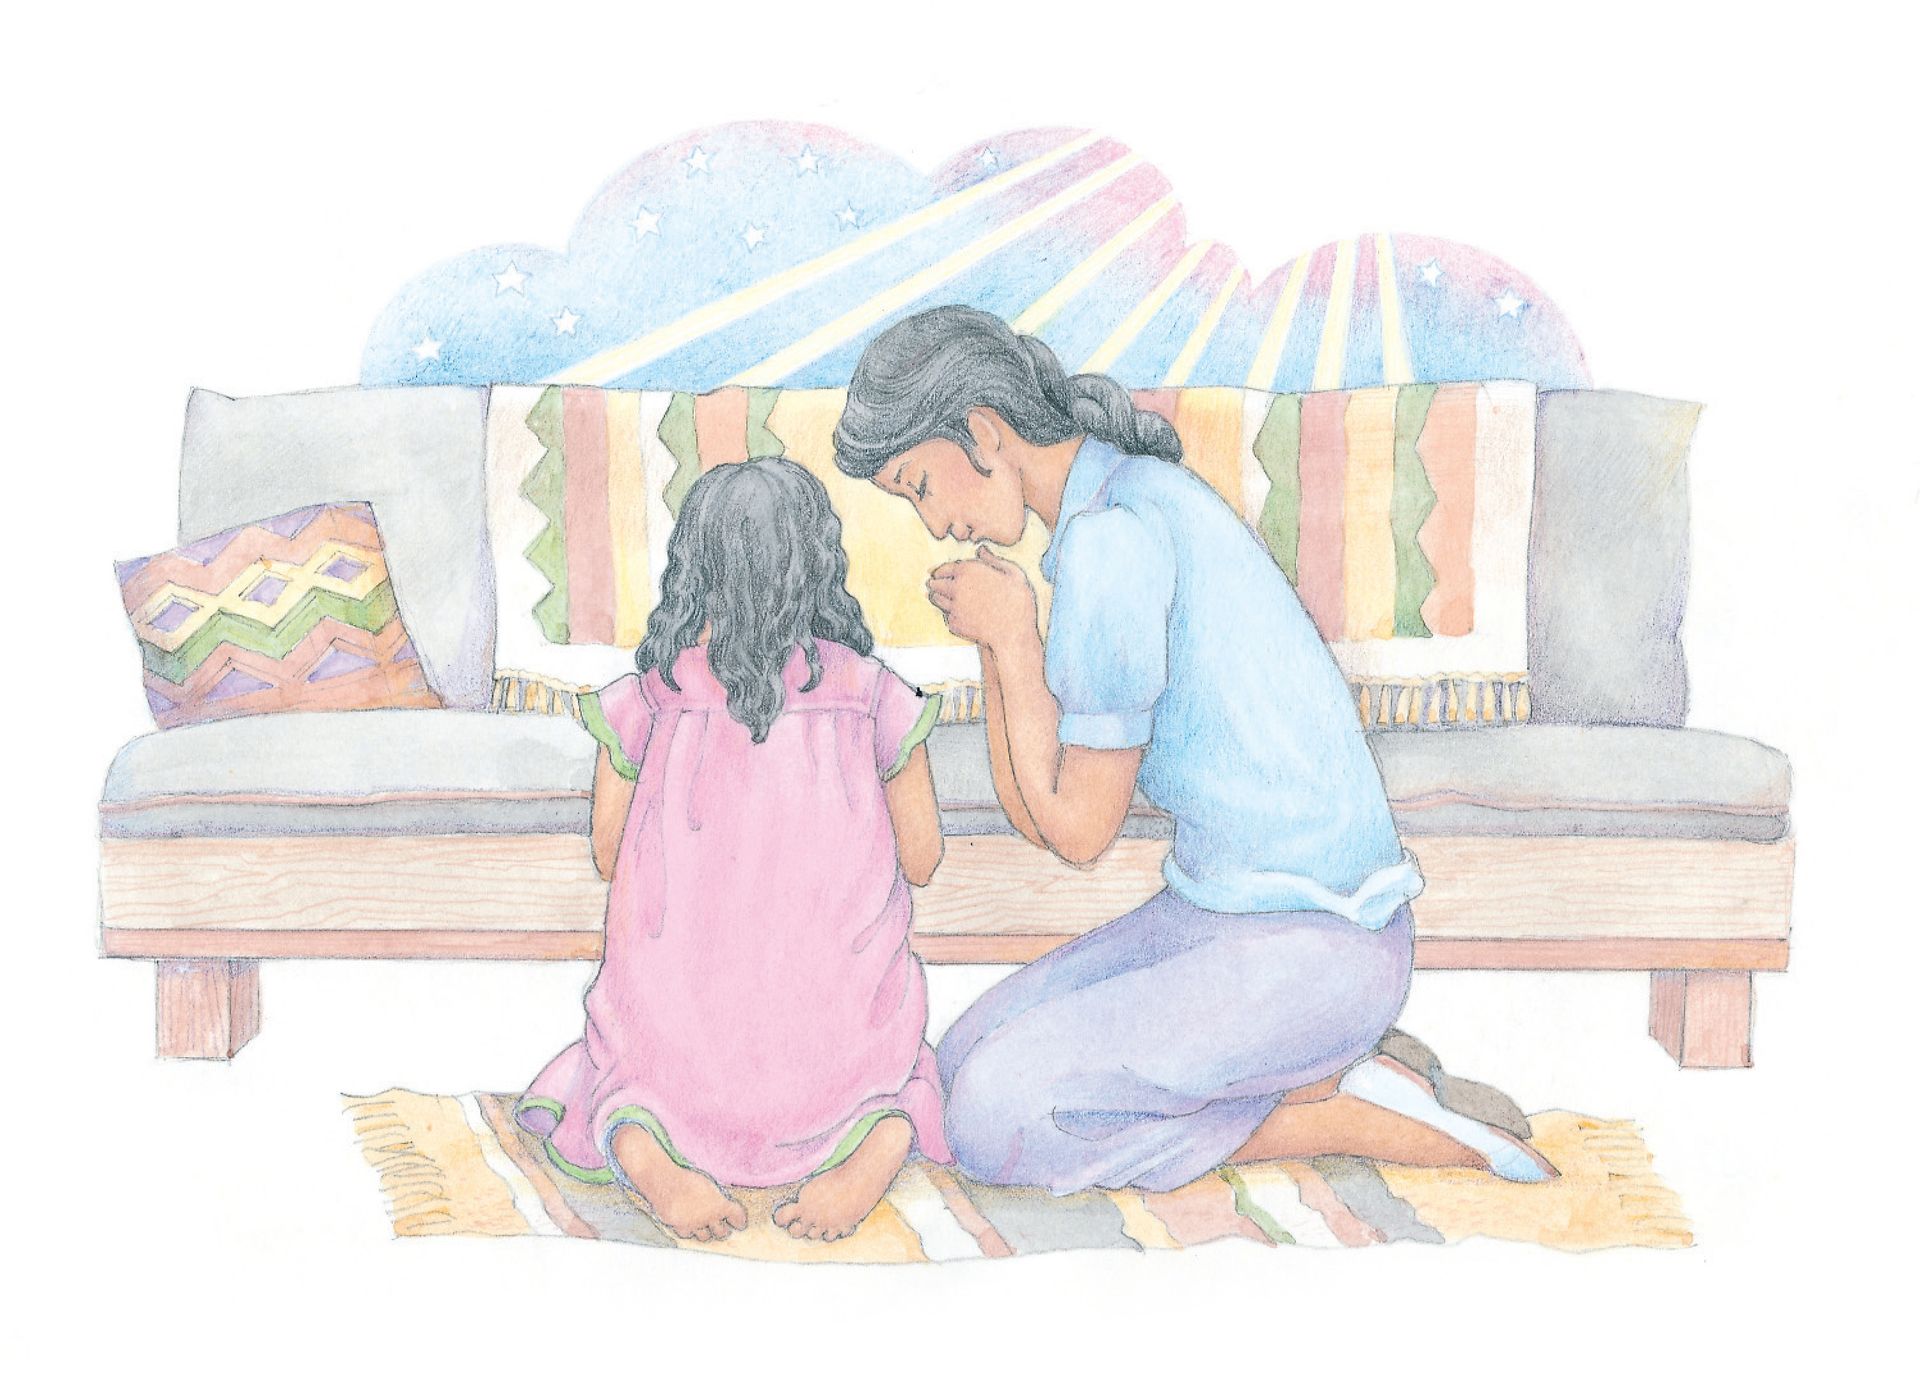 A mother and daughter kneel together in prayer. From the Children’s Songbook, page 15, “If with All Your Hearts”; watercolor illustration by Phyllis Luch.